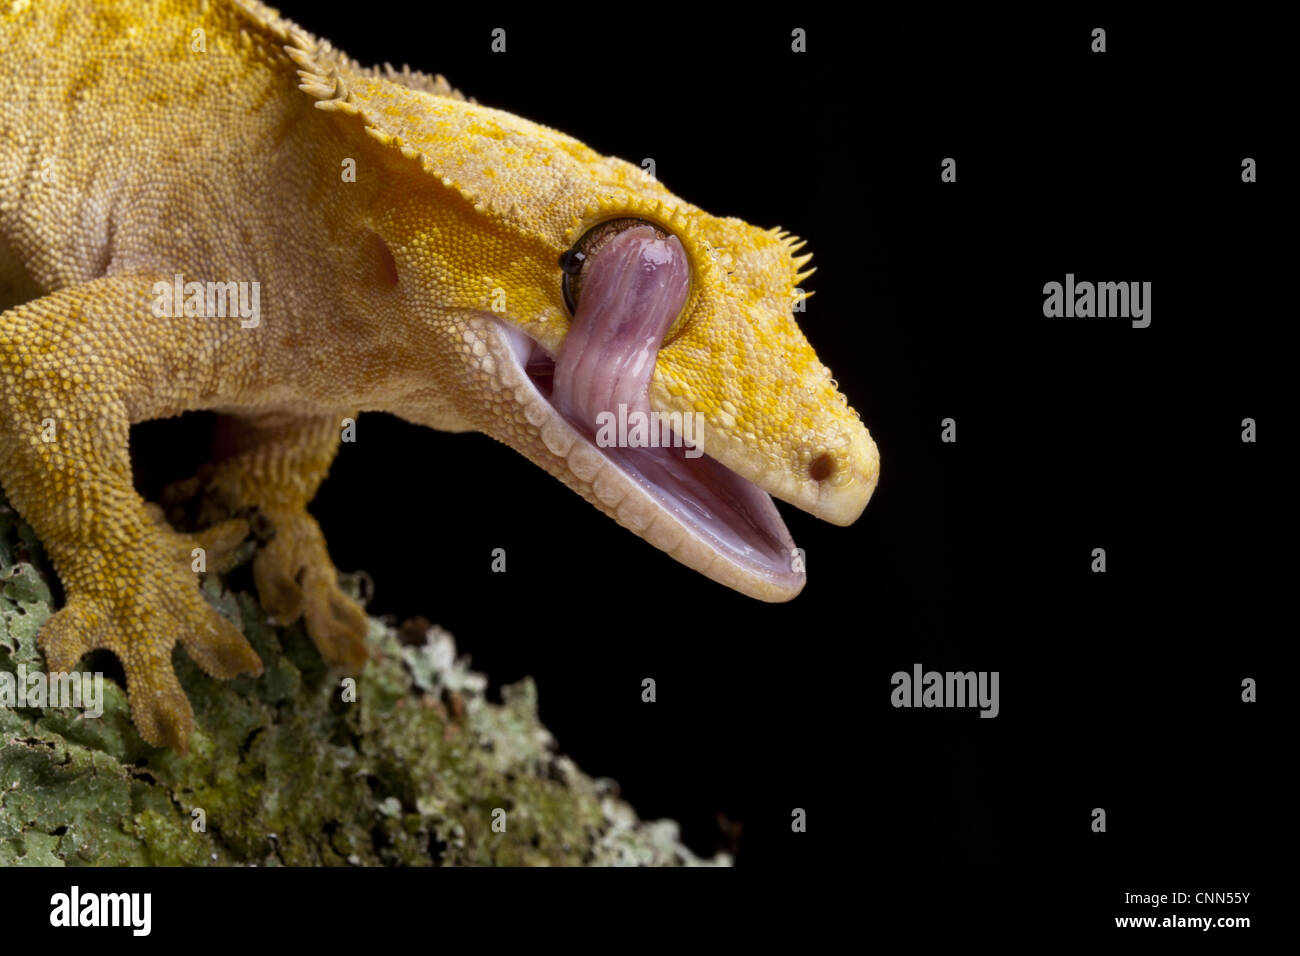 New Caledonian Crested Gecko (Rhacodactylus ciliatus) adult, close-up of head, licking eye with tongue, New Caledonia Stock Photo